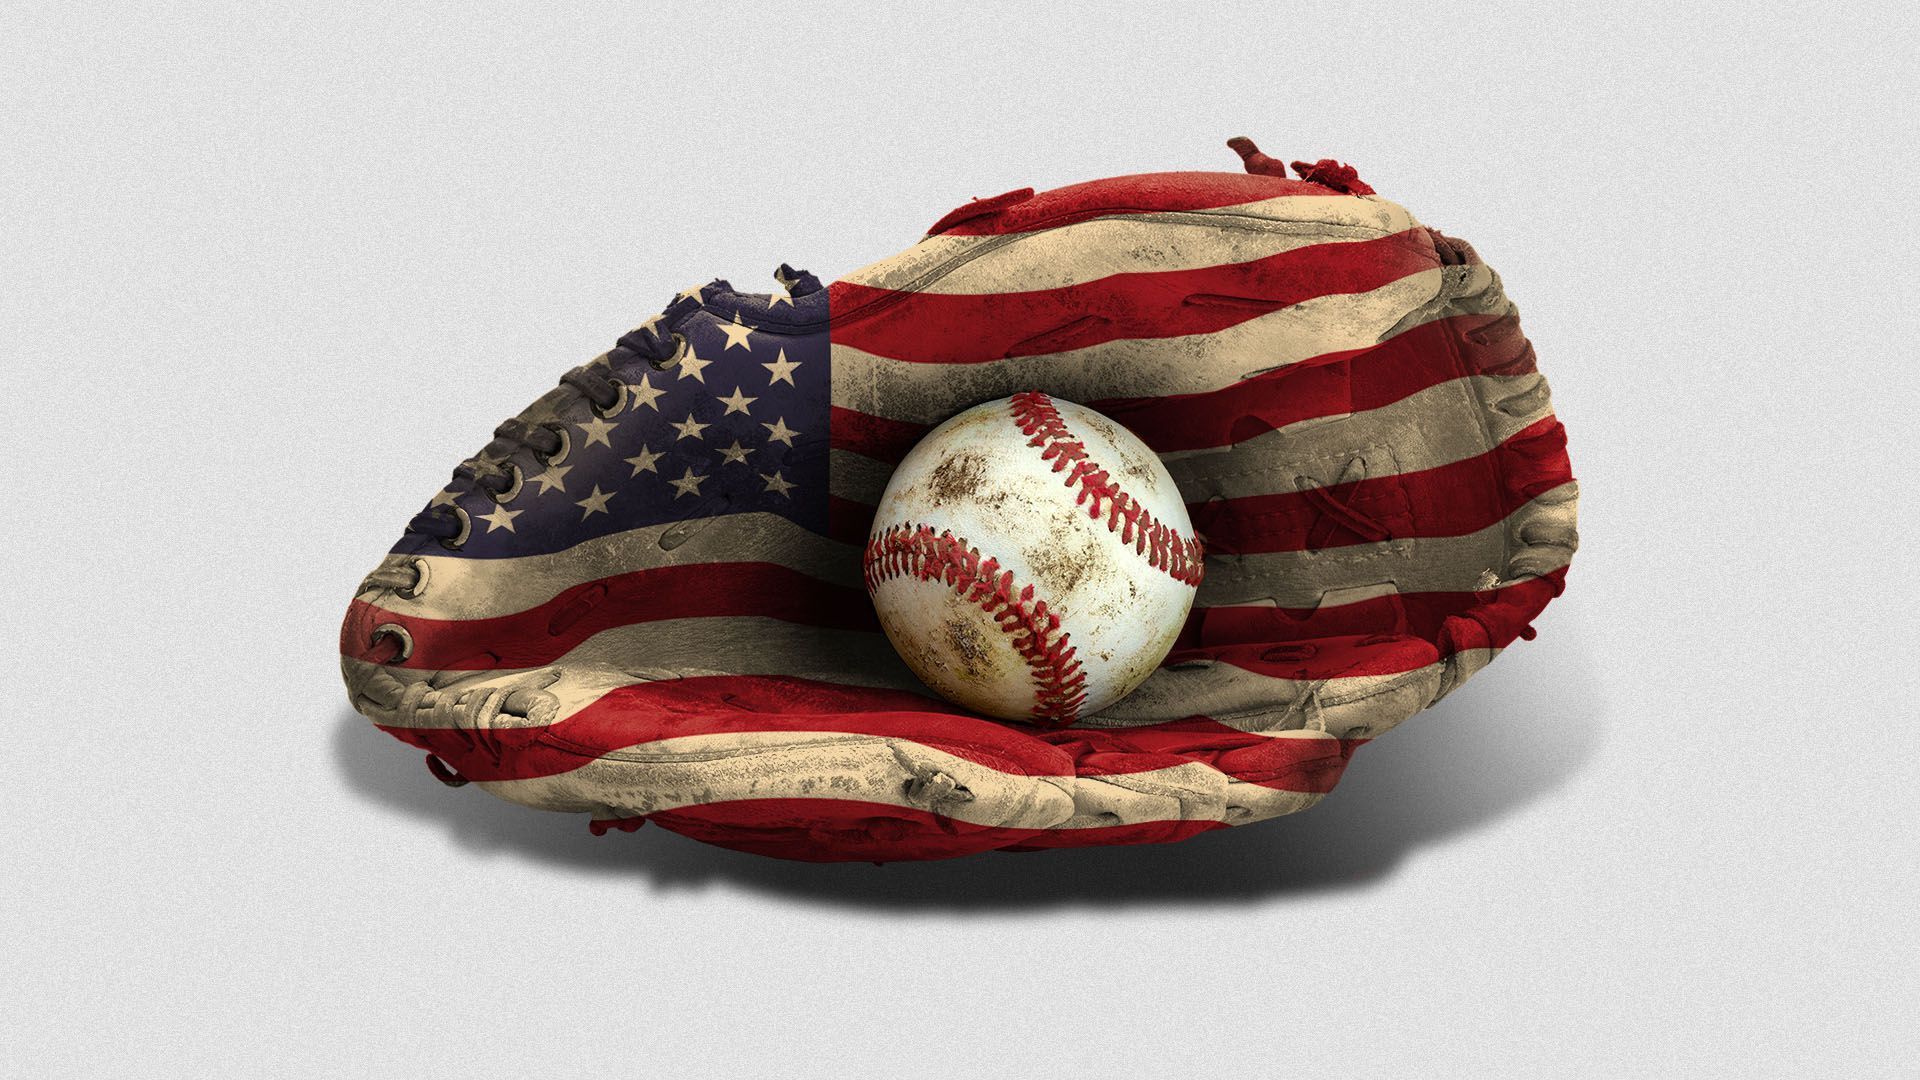 Illustration of a stars and stripes baseball glove and ball.